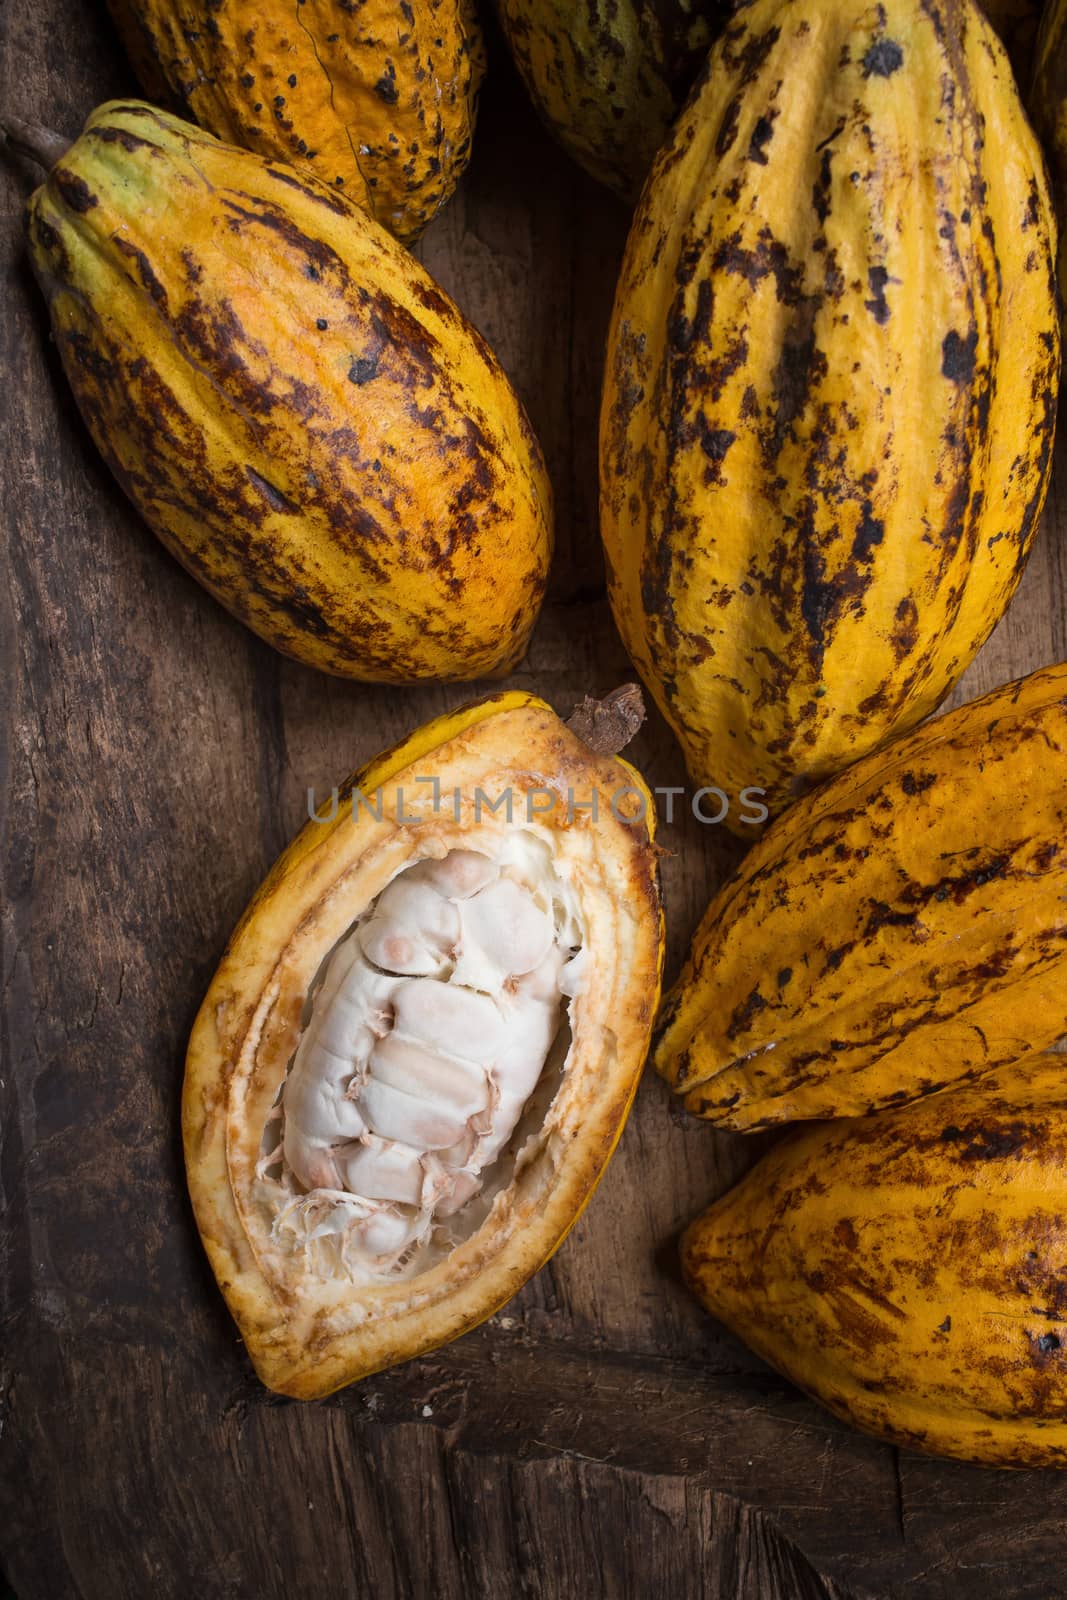 Cacao fruit, raw cacao beans, Cocoa pod on wooden background by kaiskynet